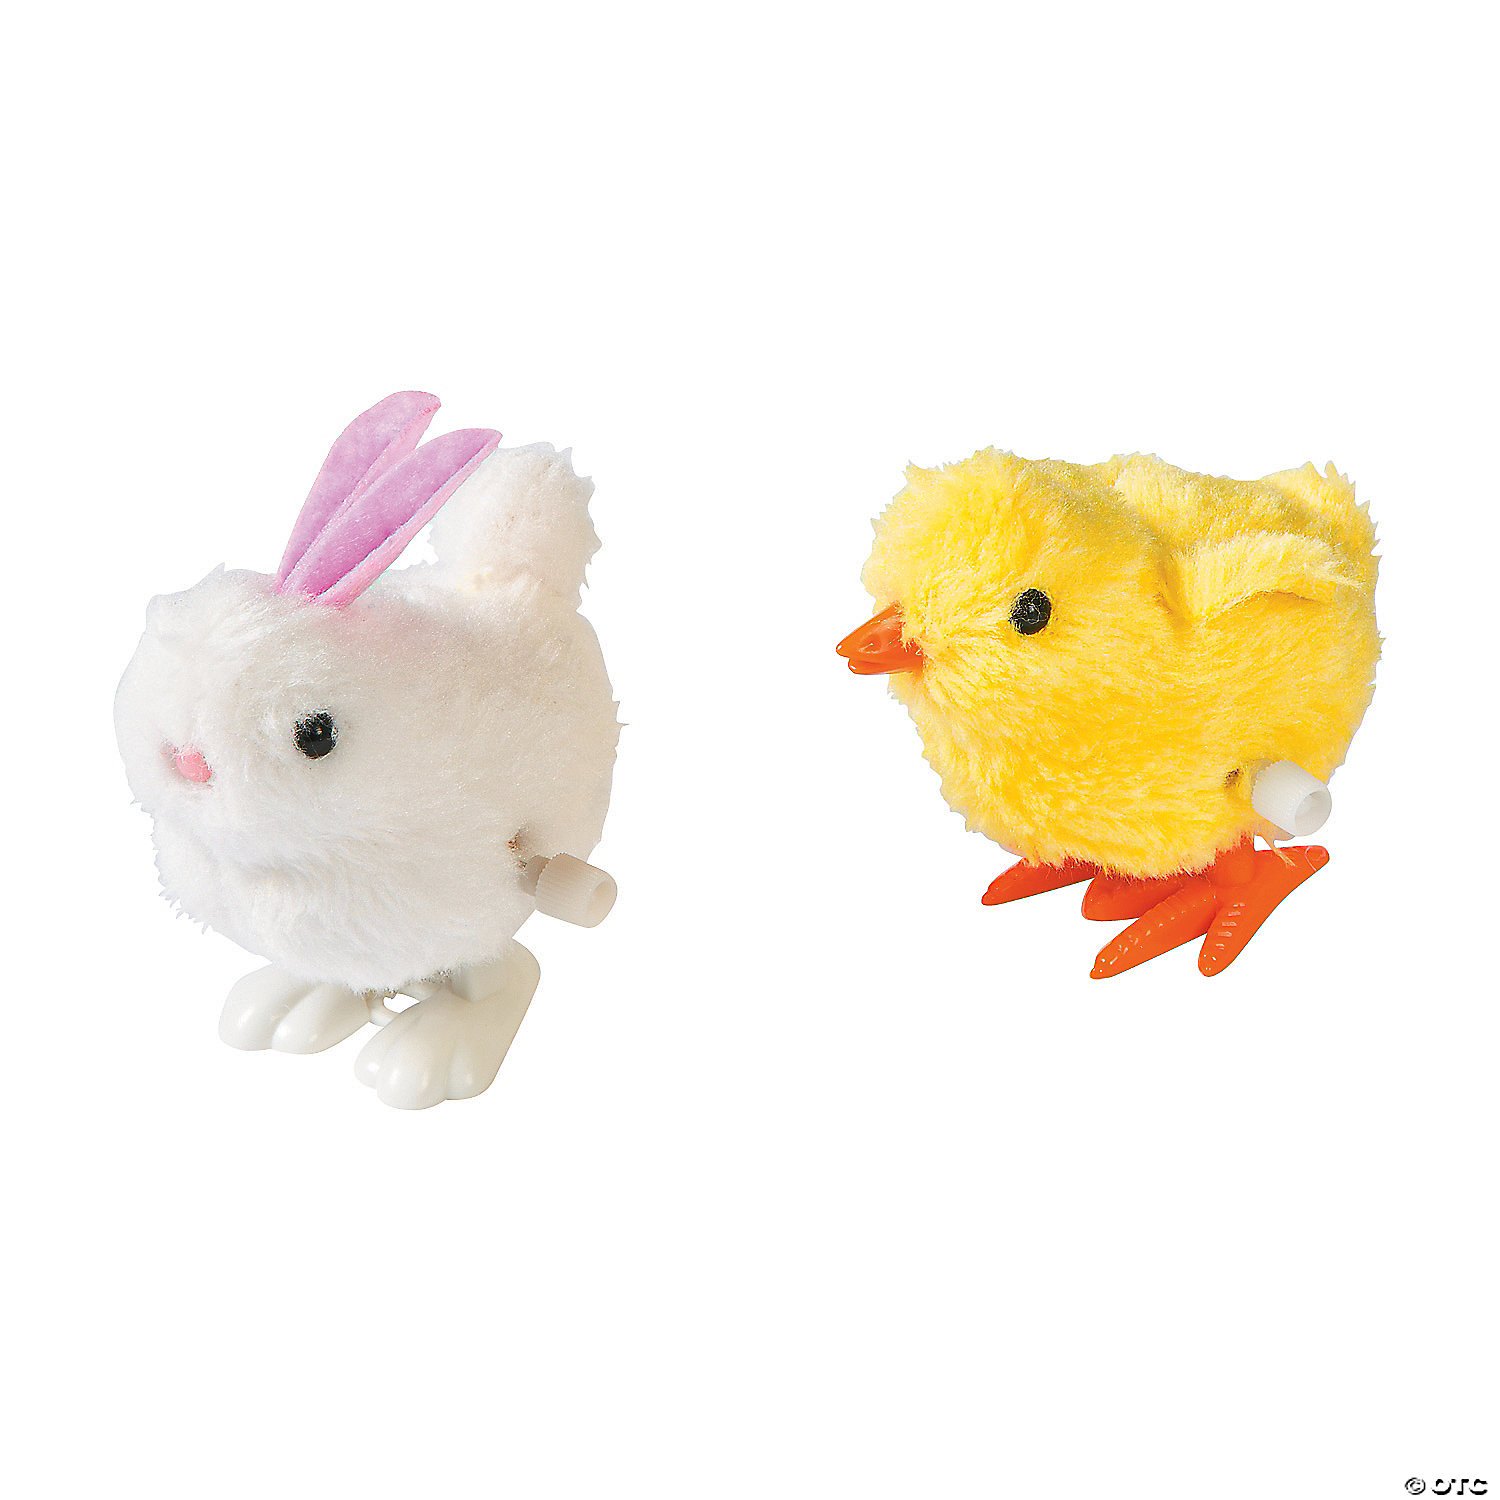 Hopping Windup Toy-Pink Chick 